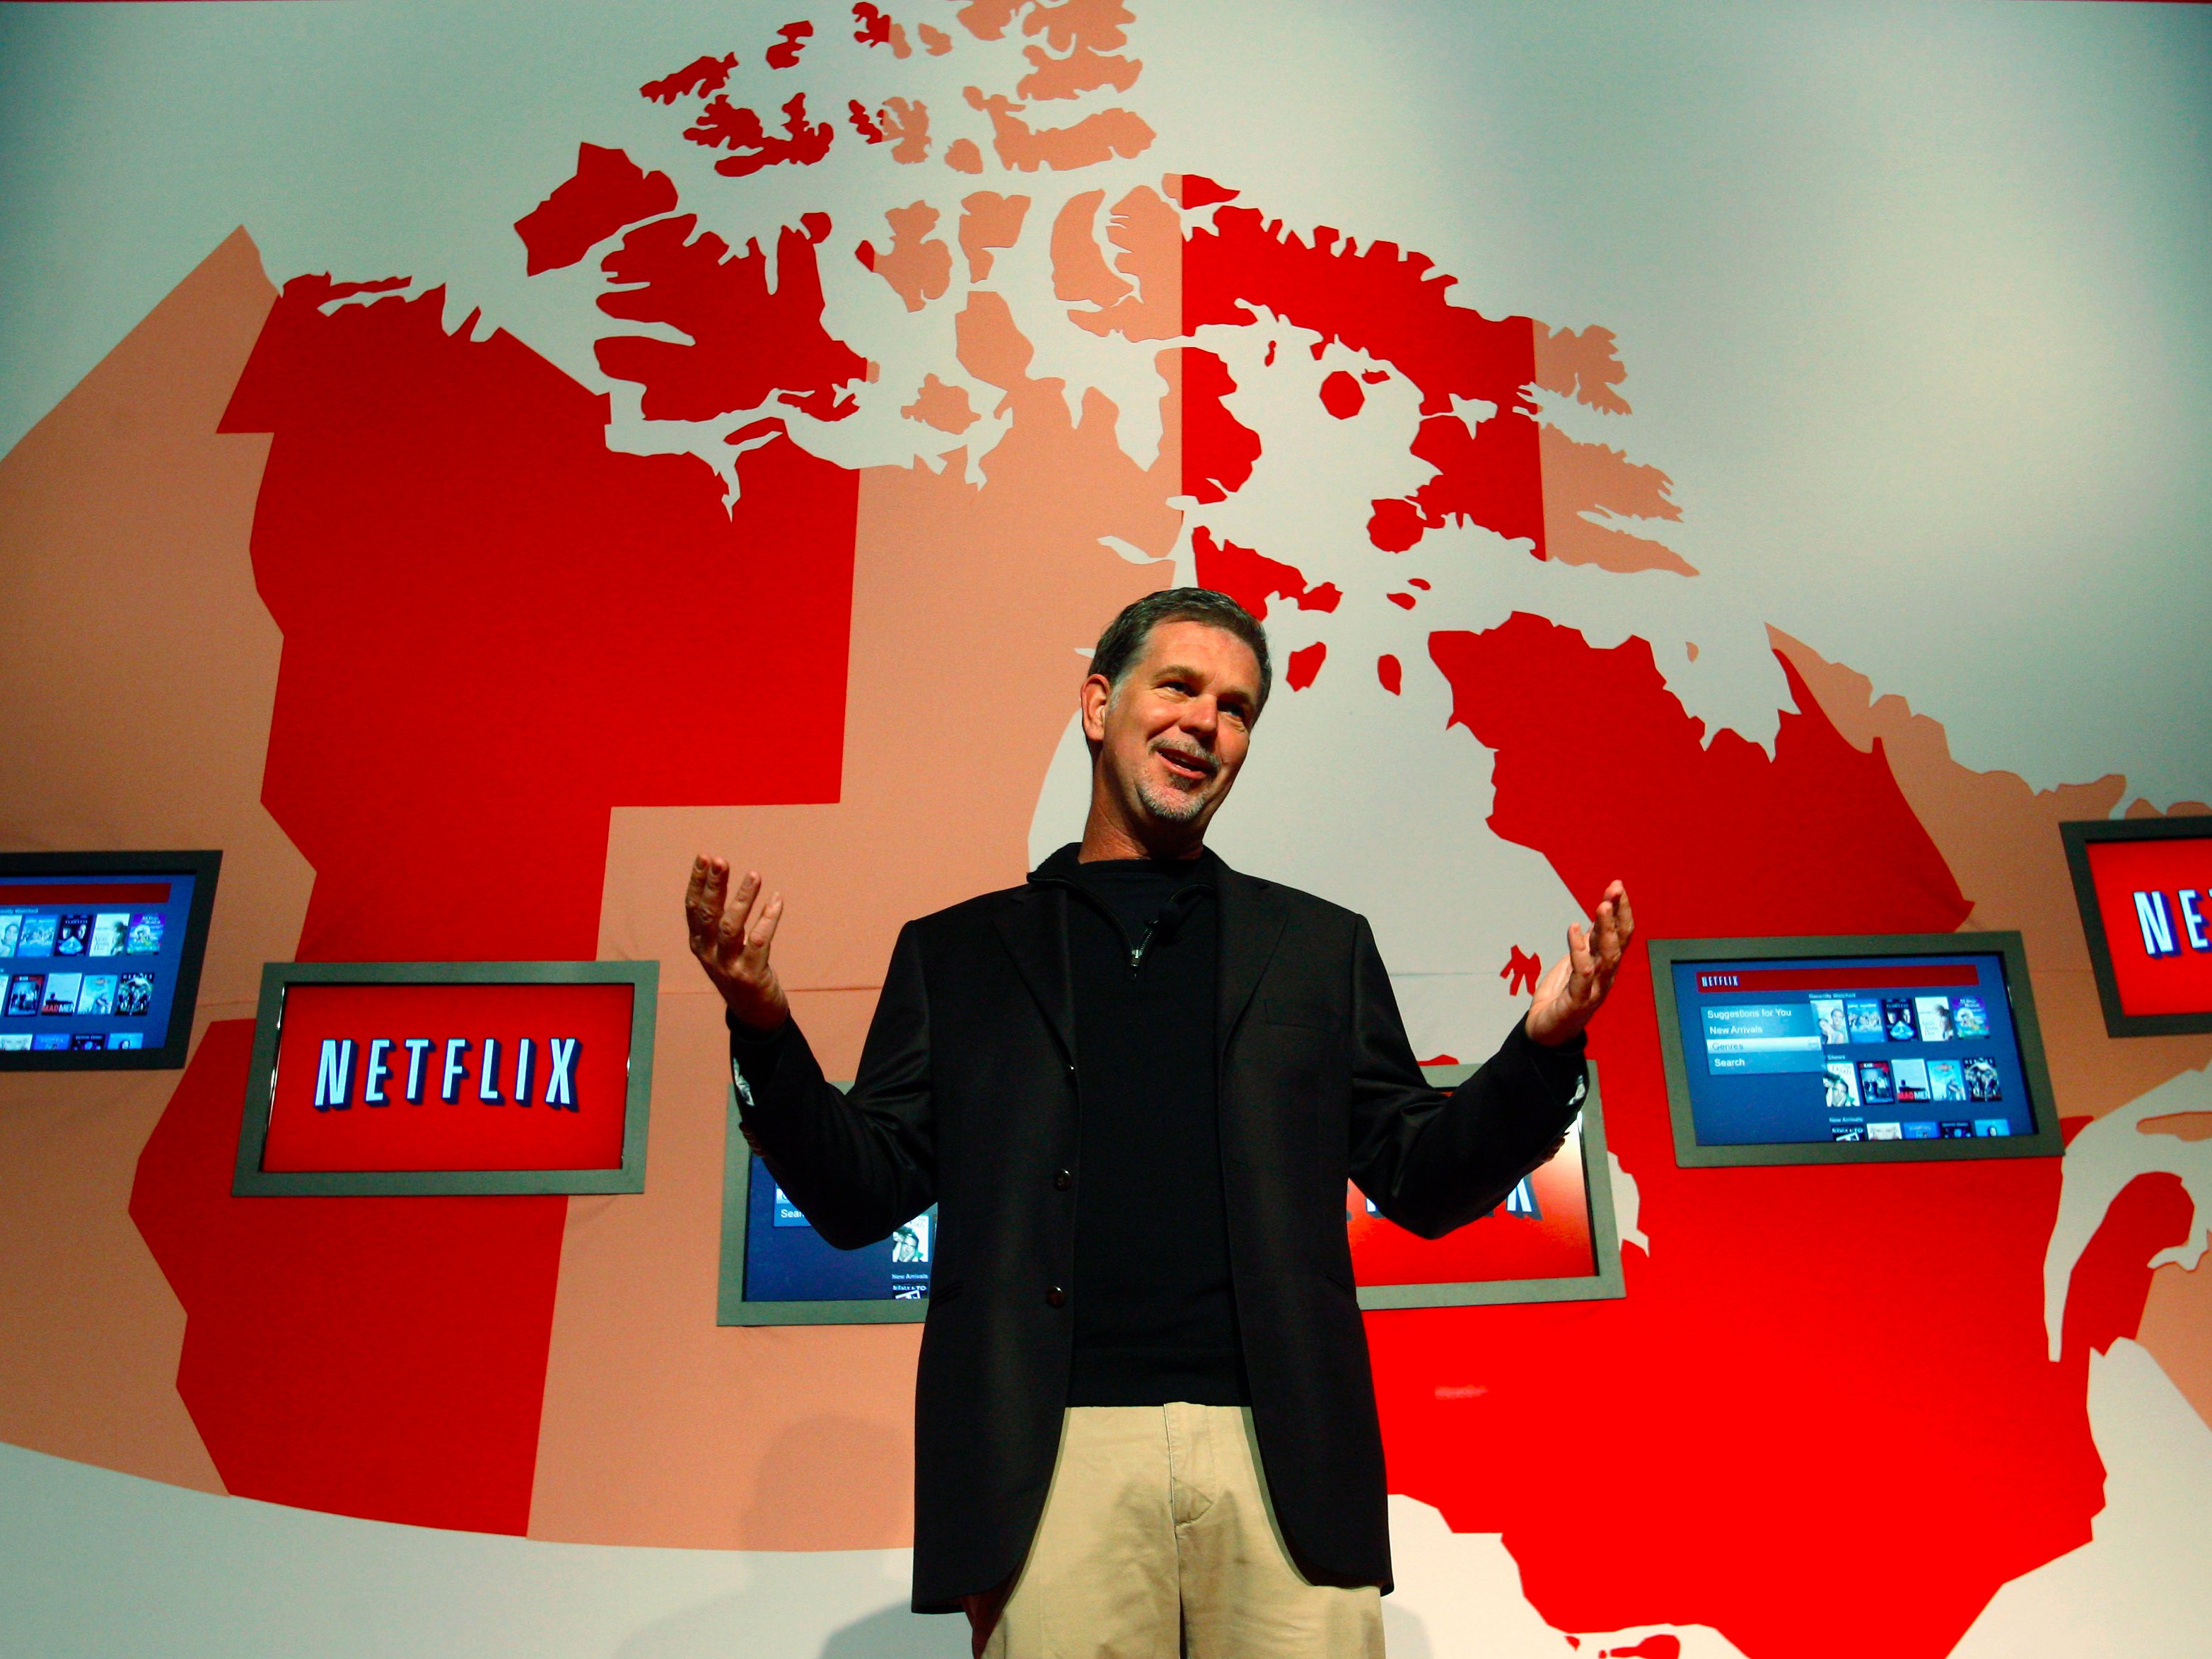 People watched 12 billion hours of Netflix in the last 3 months of 2015